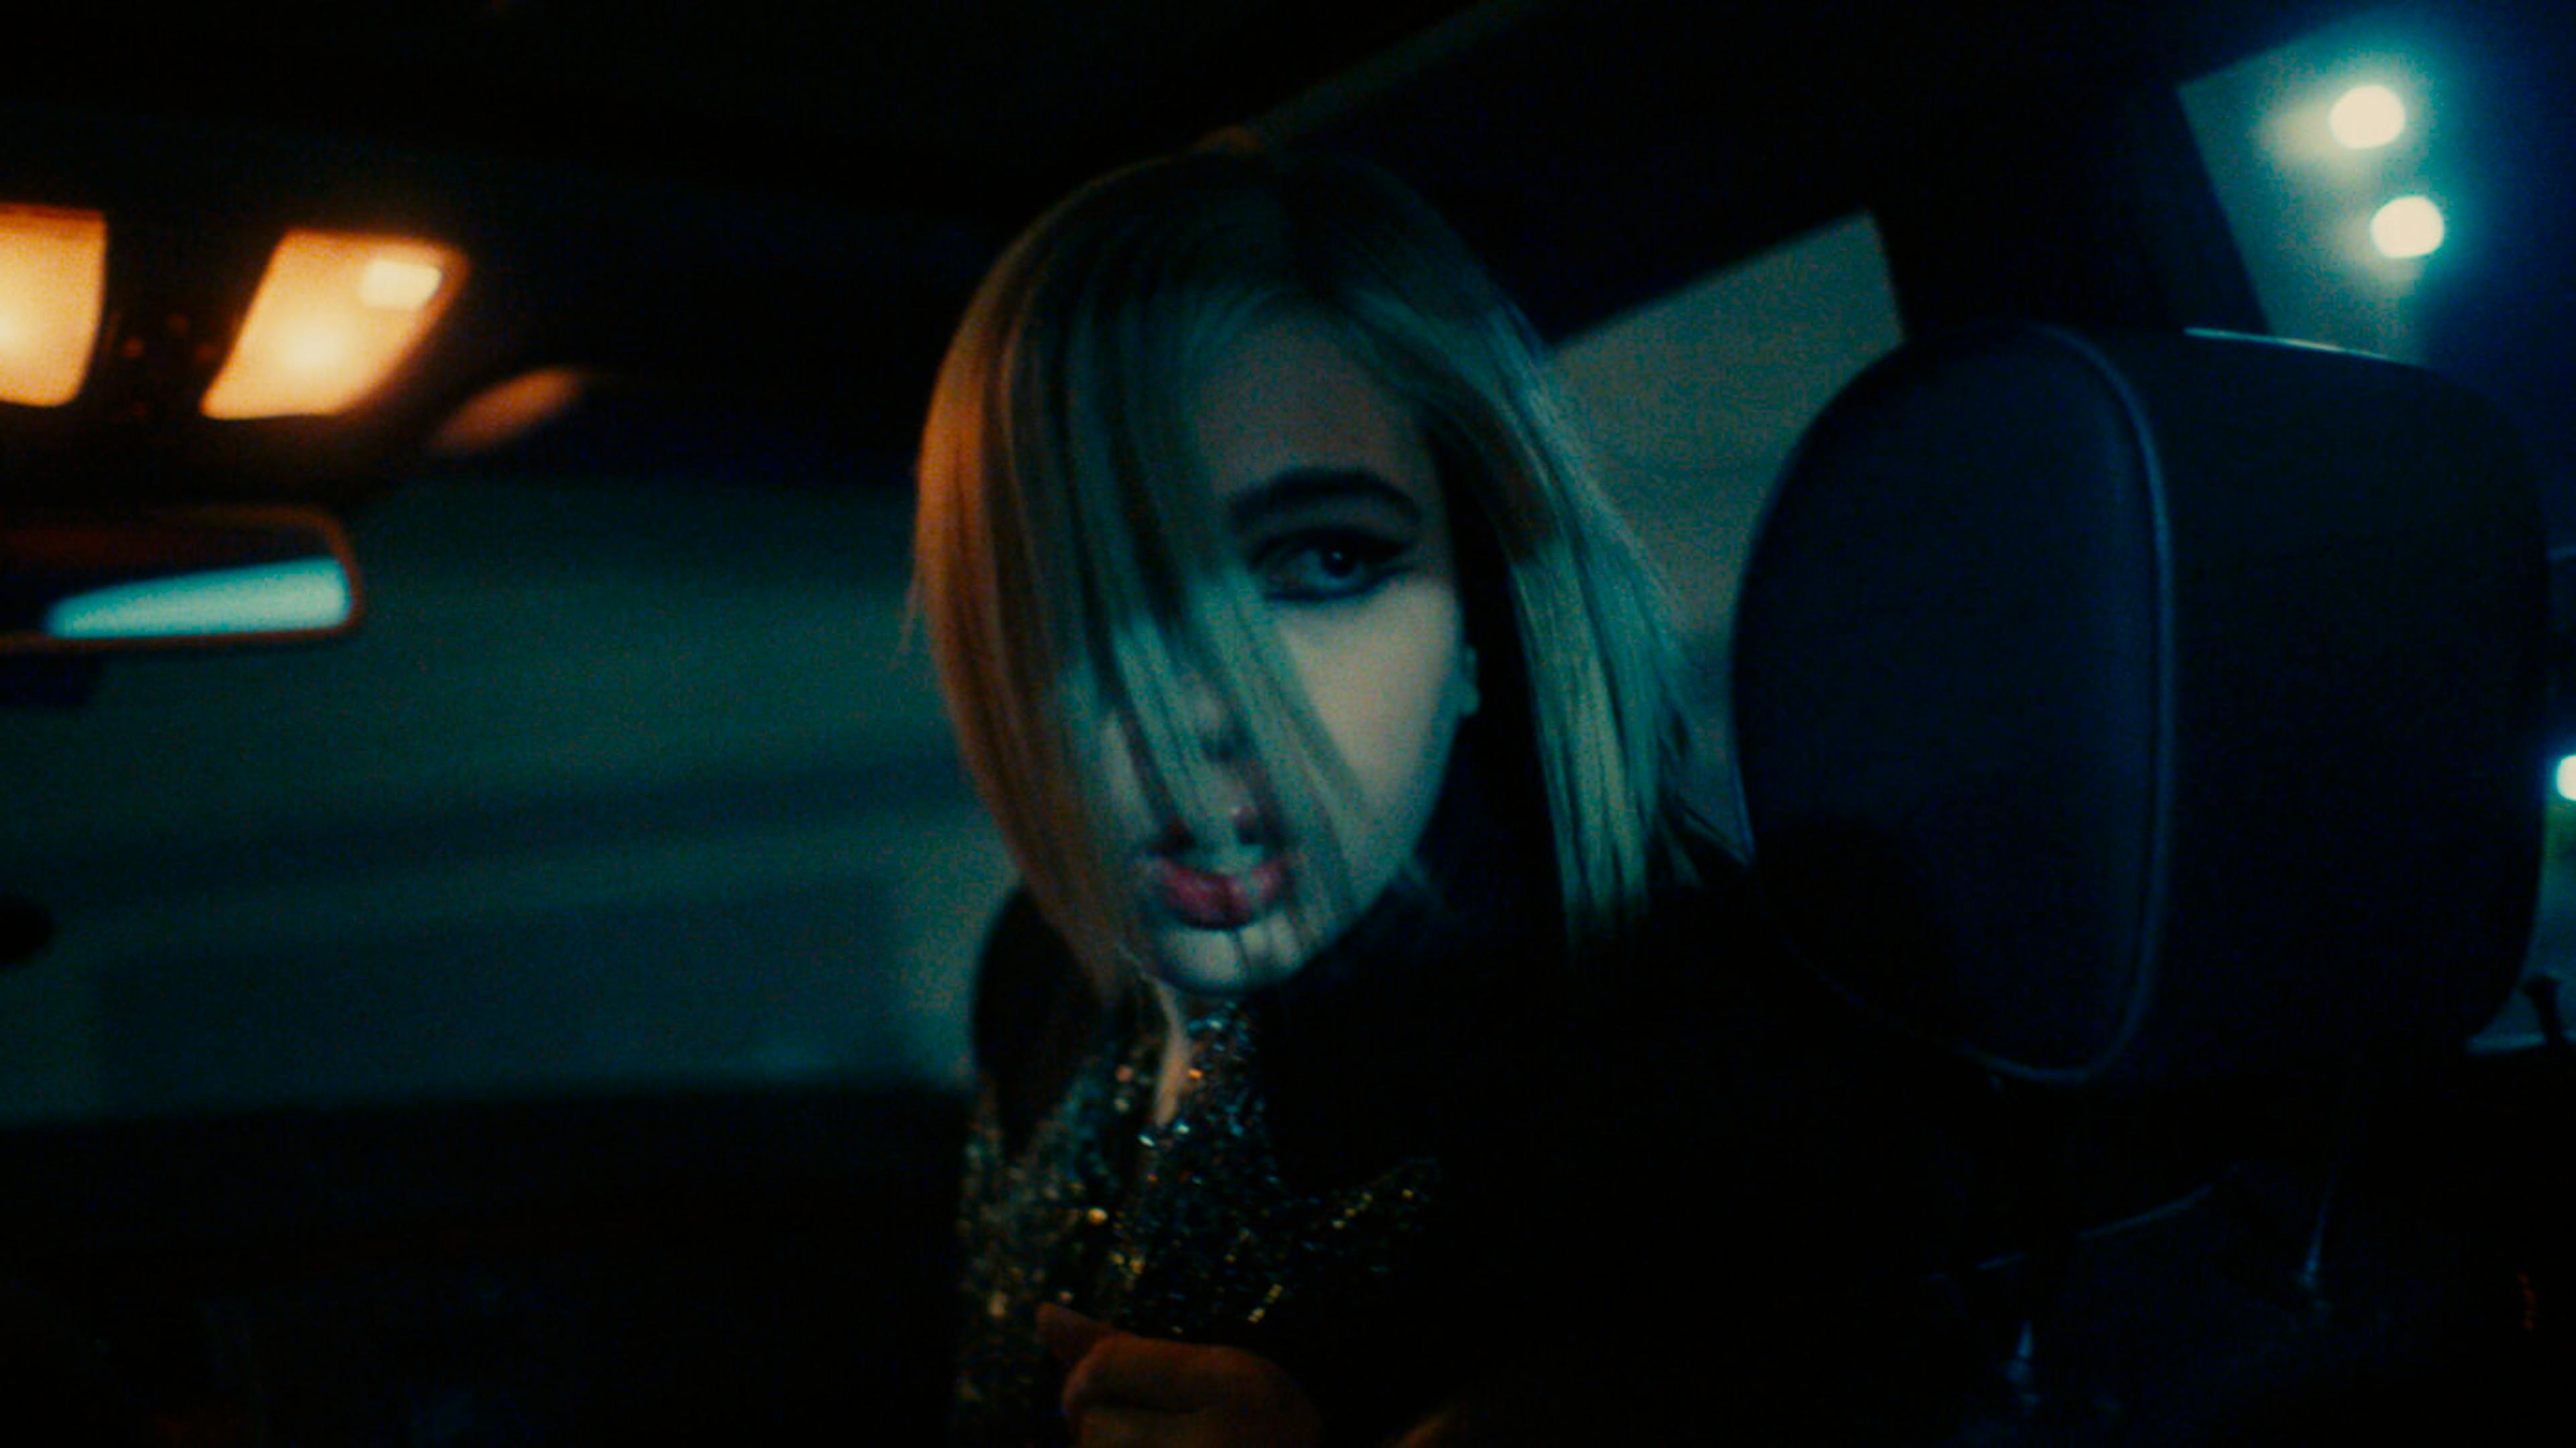 A woman with blonde hair and striking makeup looks intently through the car's front seats in a nighttime setting, in a still from Sunflower Bean's 'Who Put You Up To This?' music video.